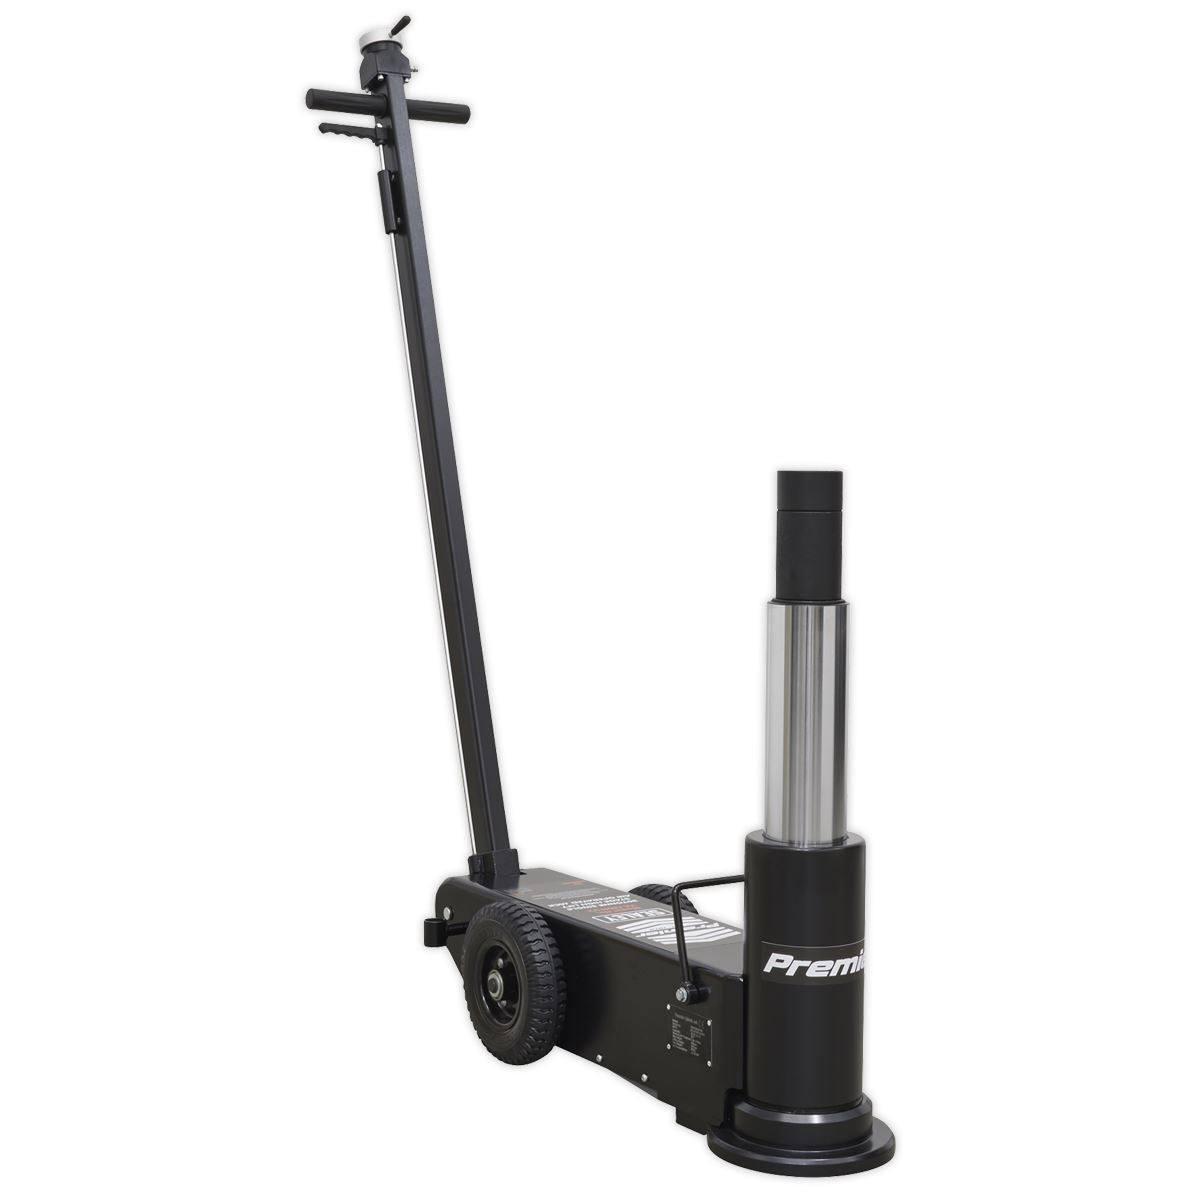 Sealey Premier Premier Air Operated High Lift Single Stage Jack 30 Tonne